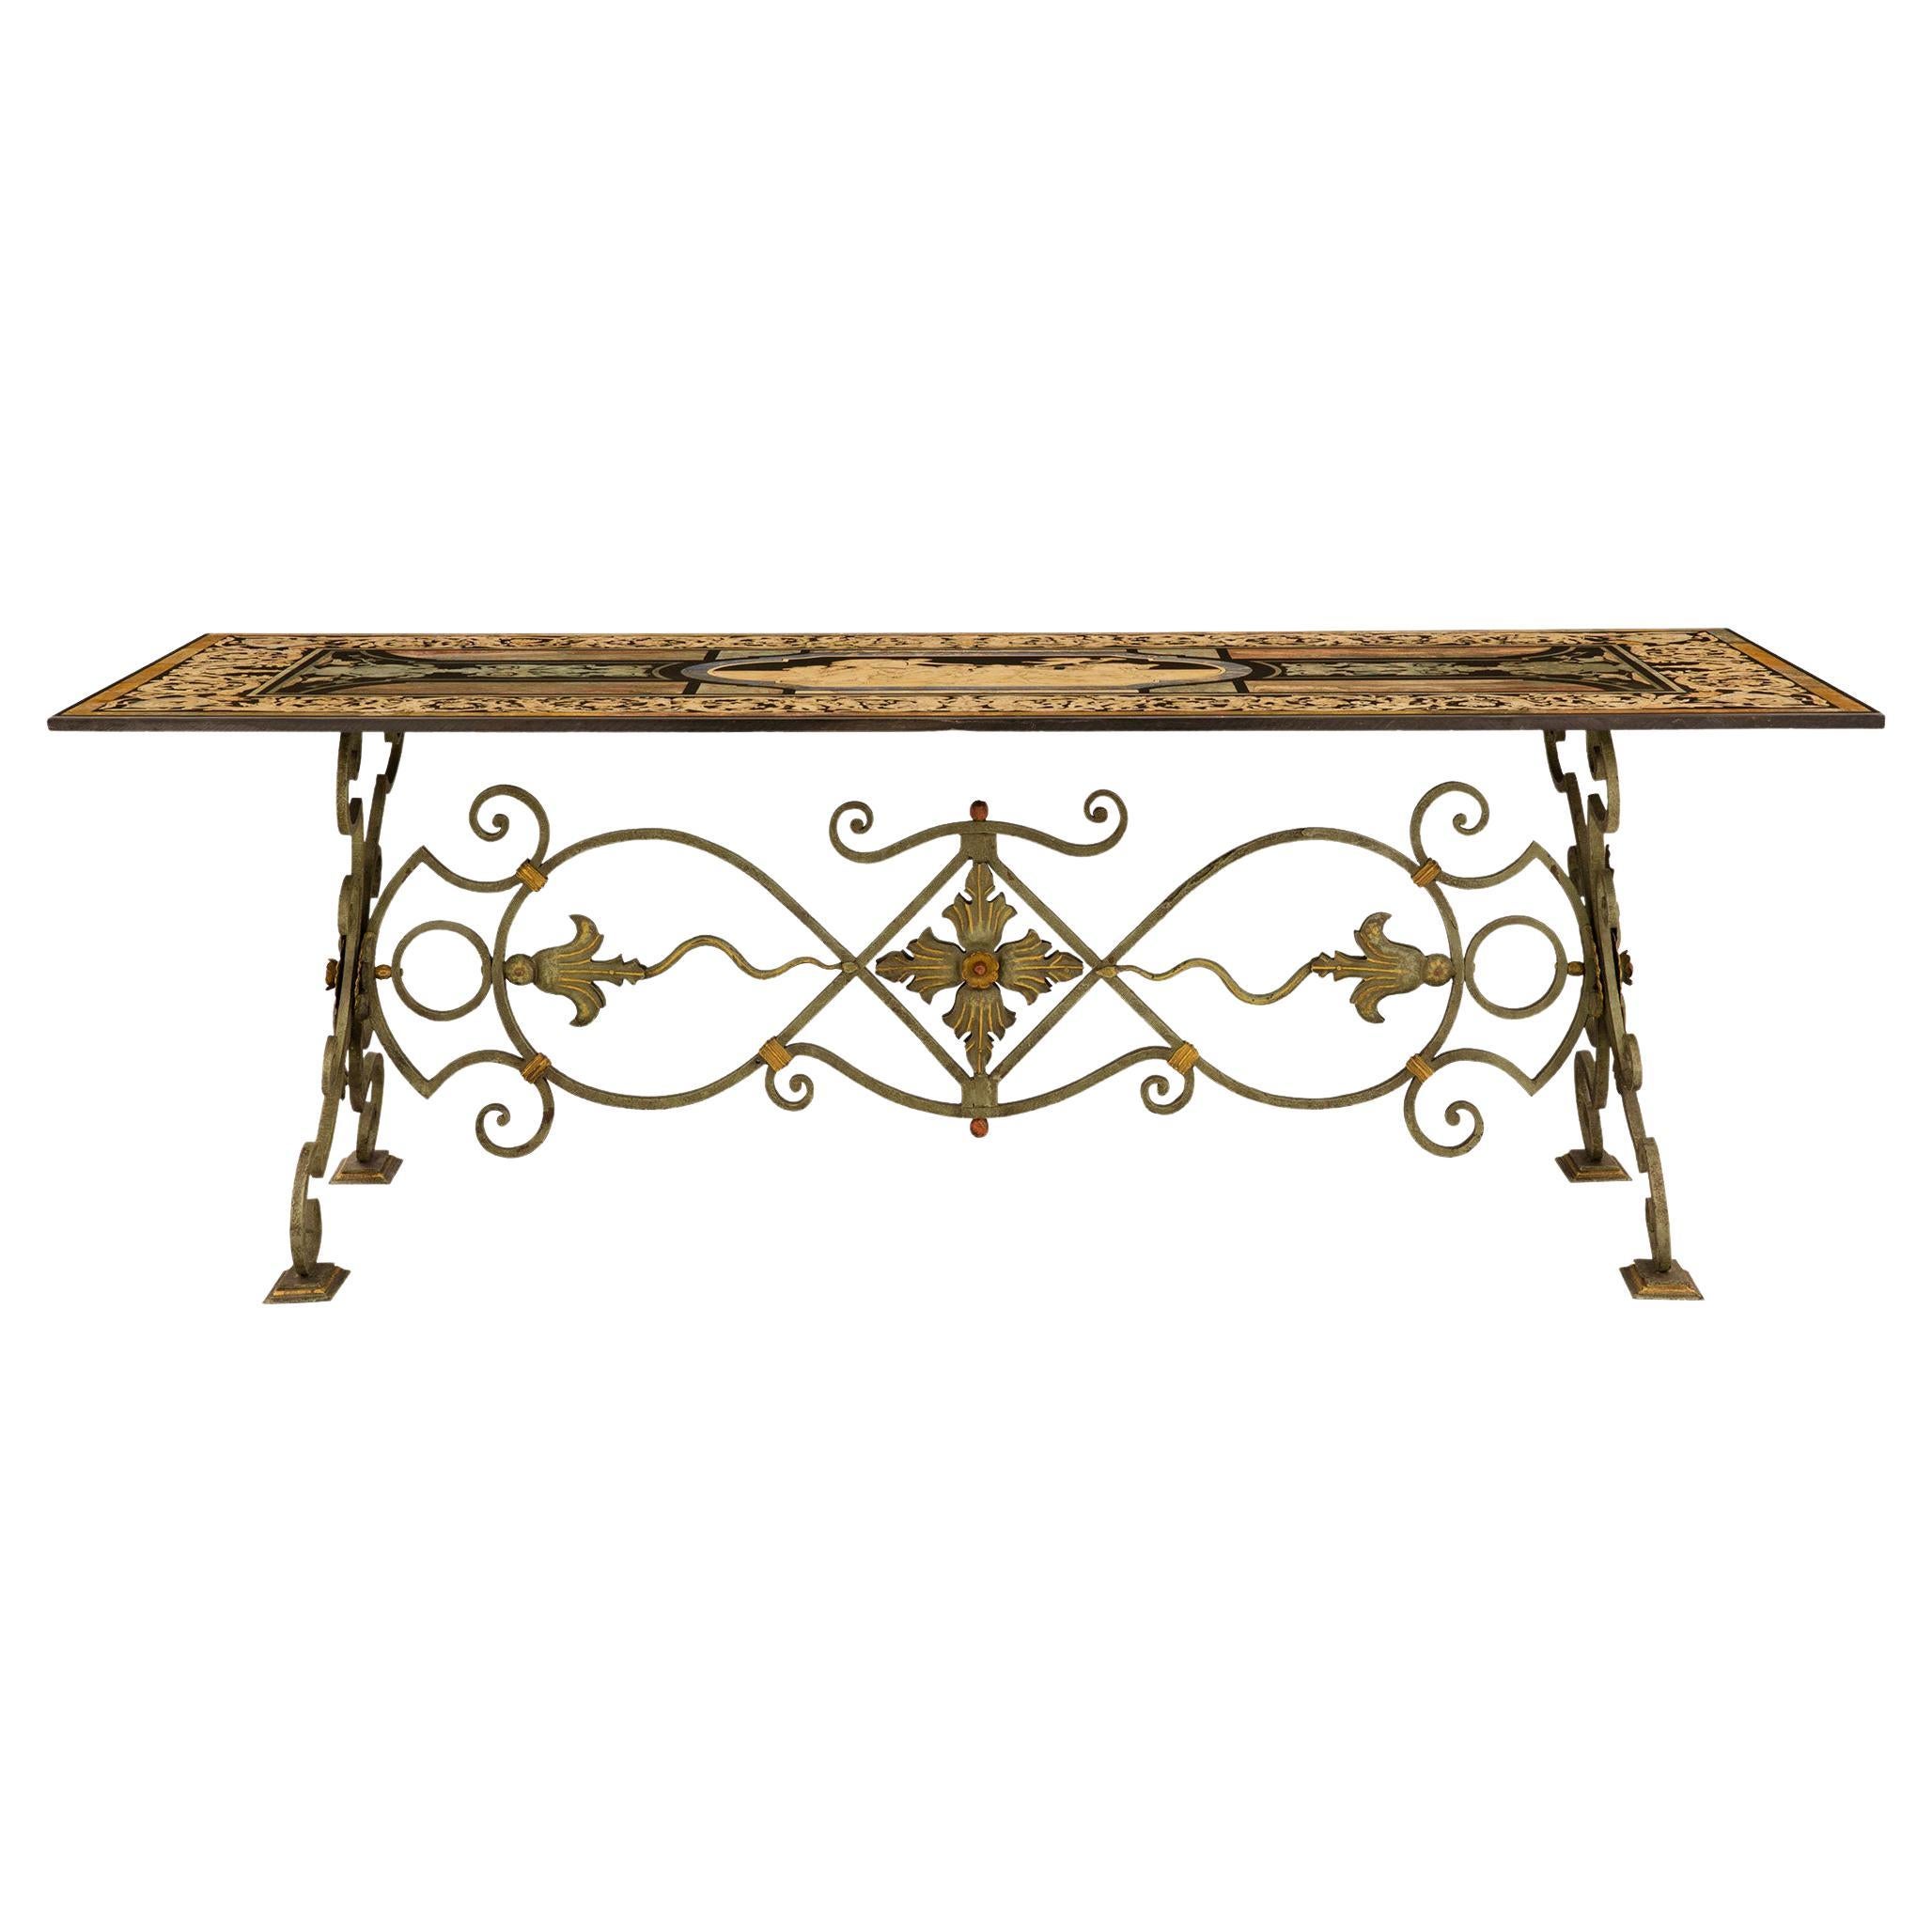 Italian 19th Century Wrought Iron, Gilt and Scagliola Center/Dining Table For Sale